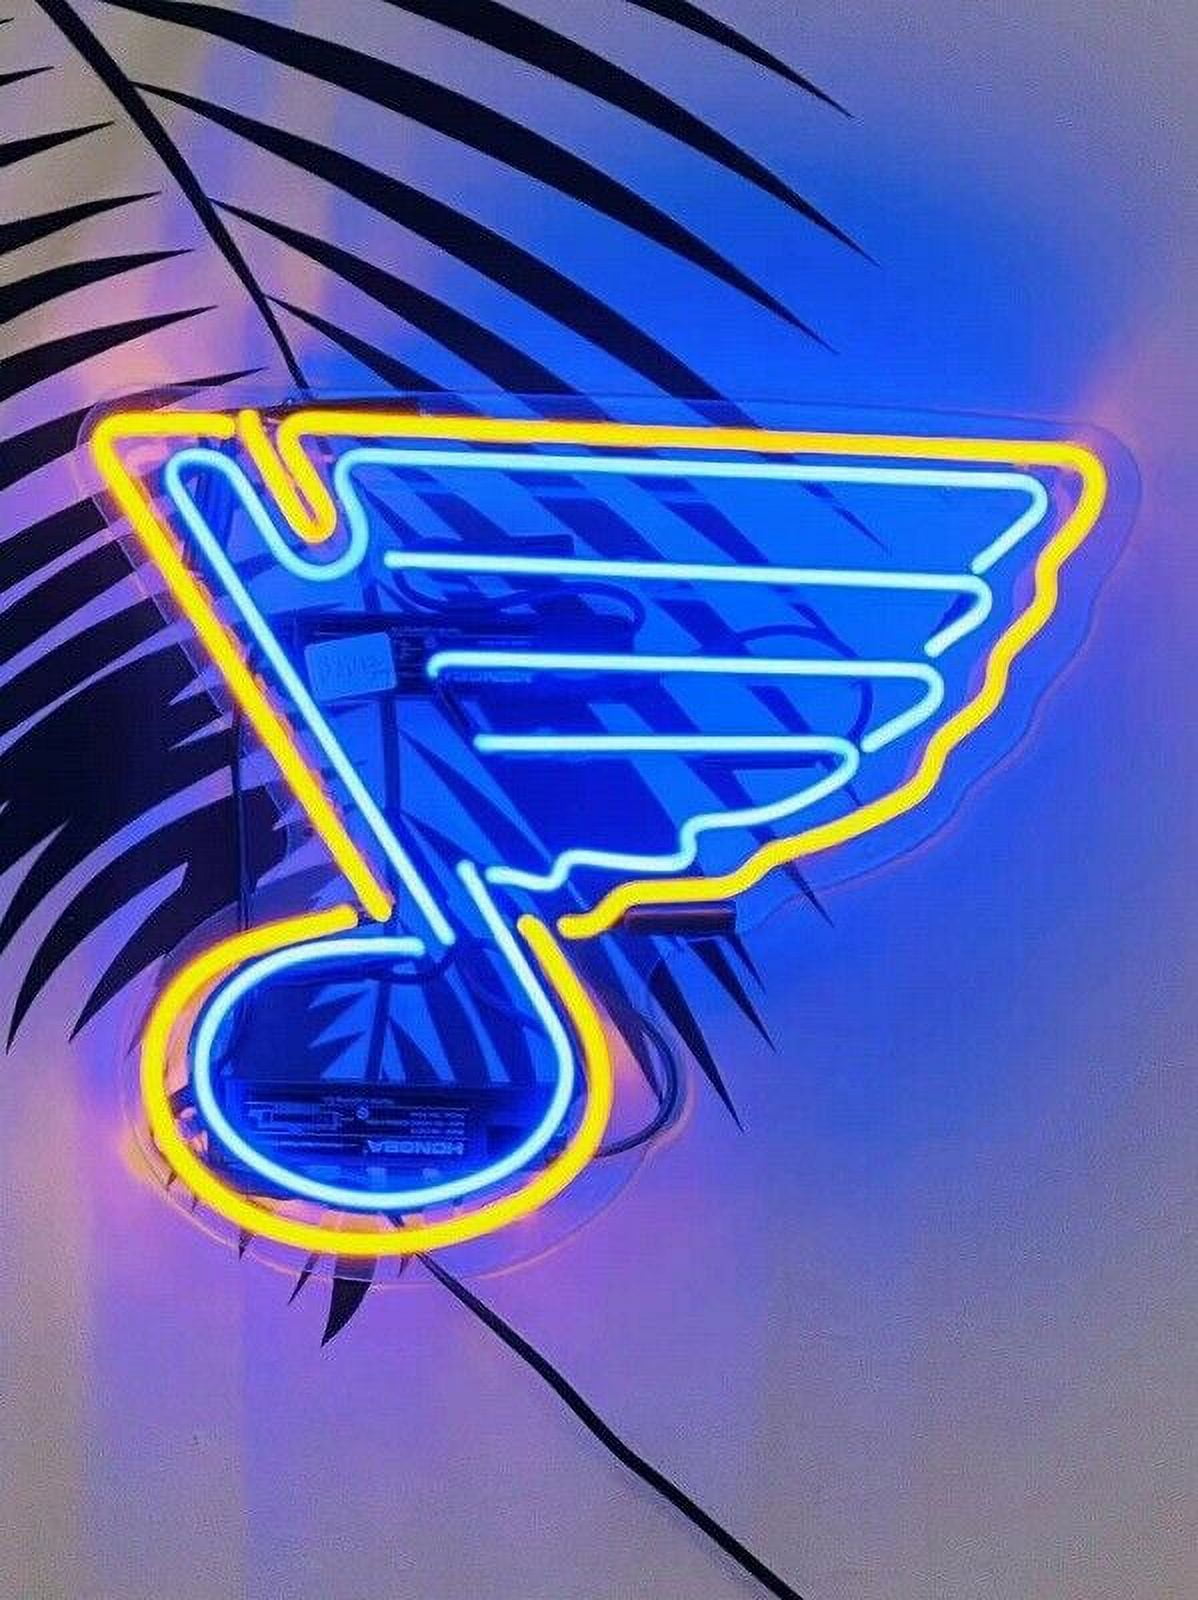 Queen Sense 17 For St Louis's Sports Team Blues Neon Sign Acrylic